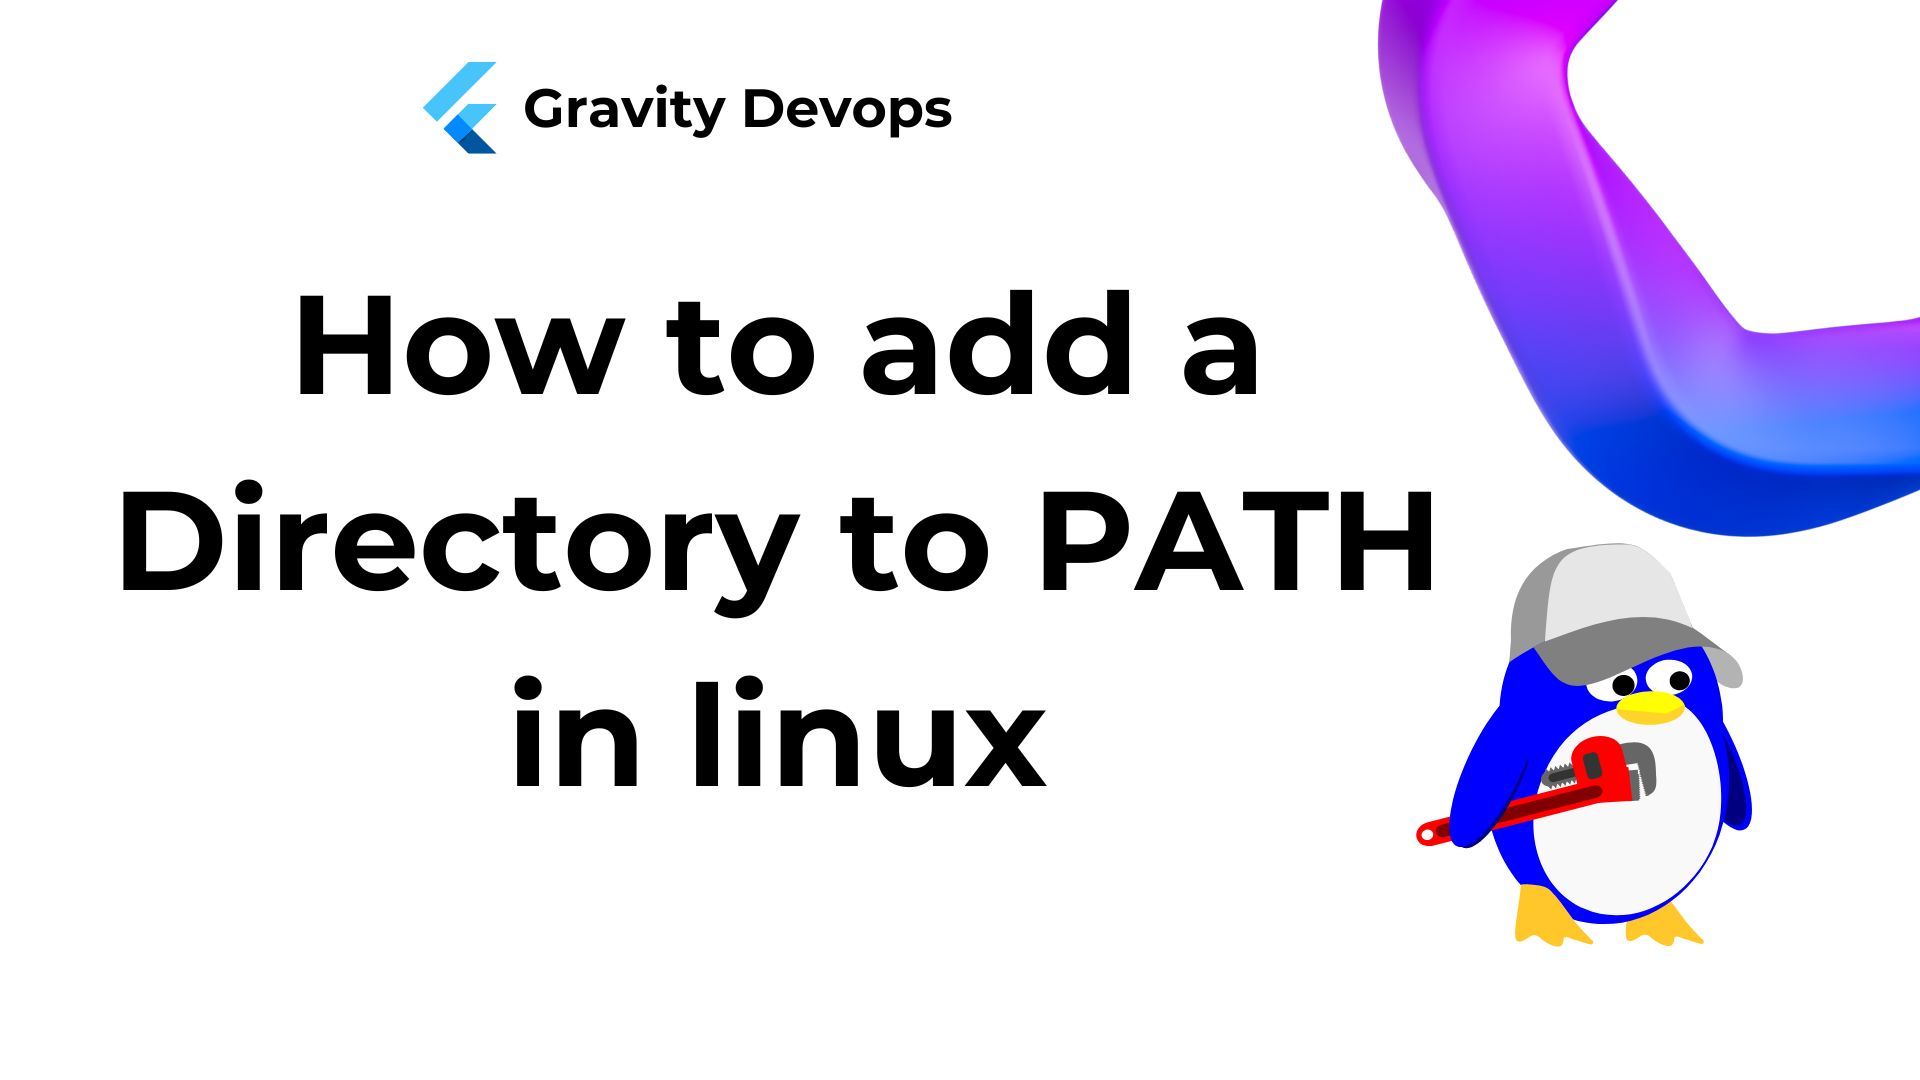 How to add a Directory to PATH in linux